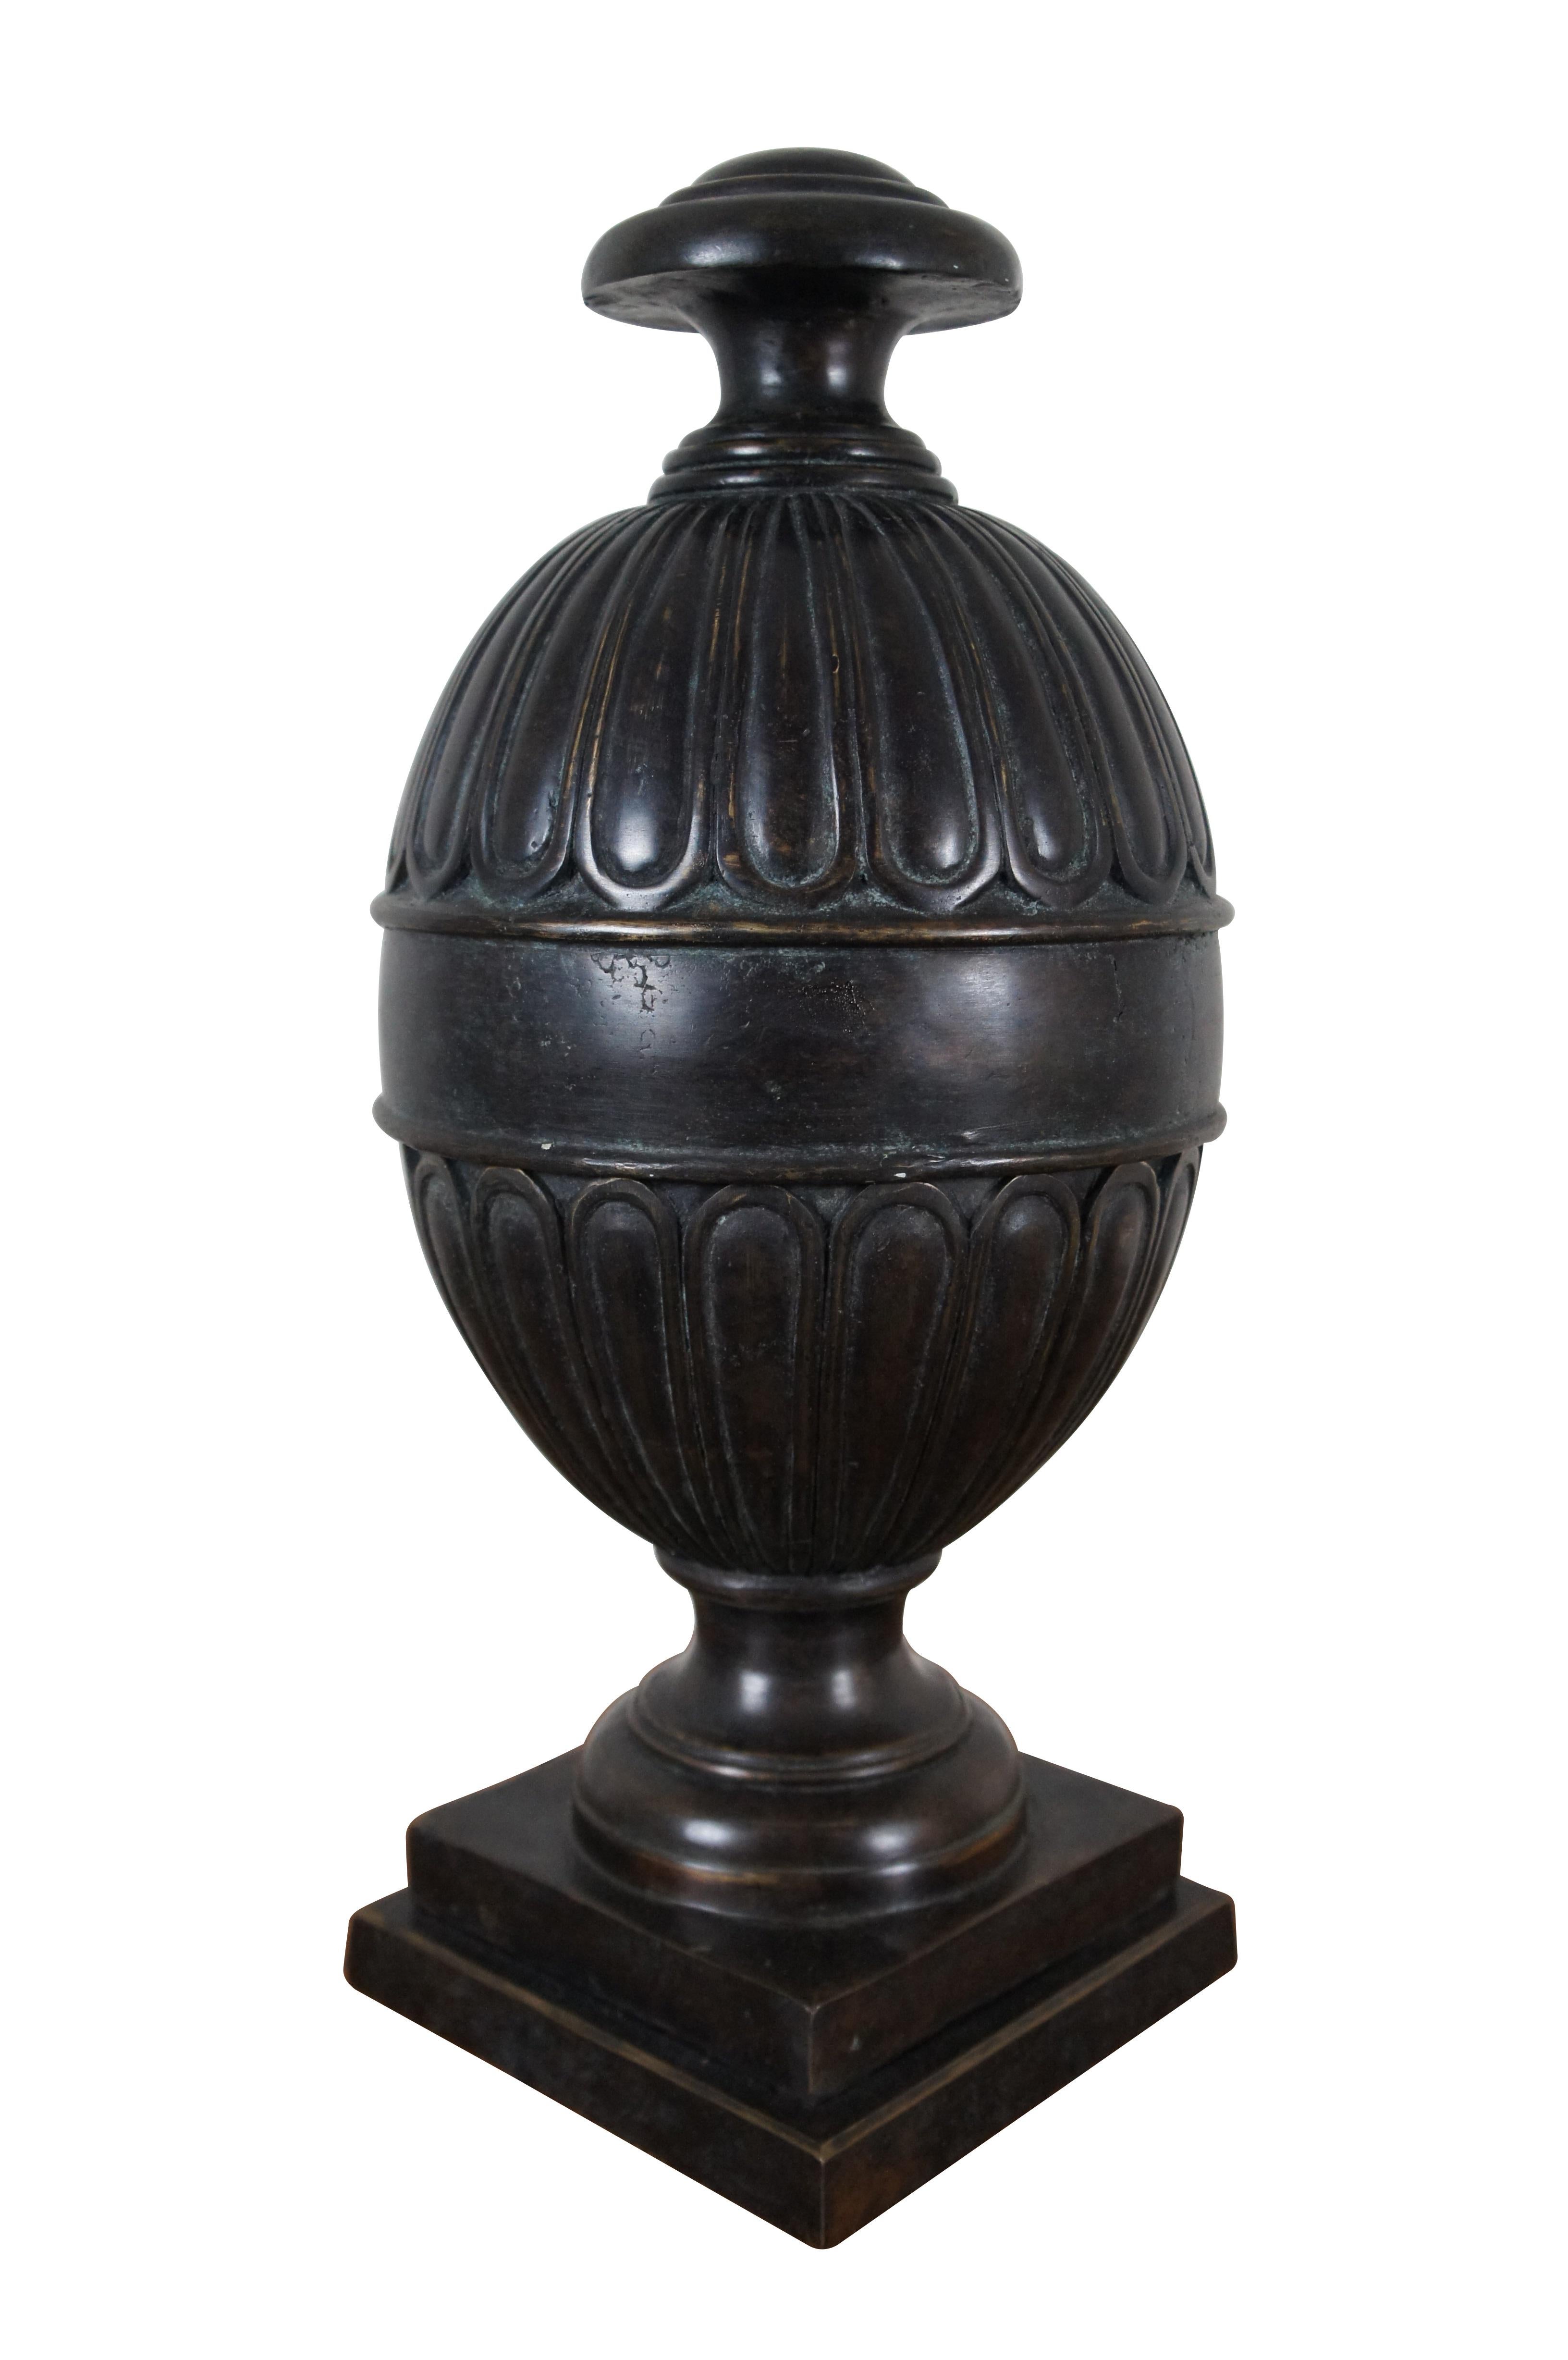 Neoclassical Revival Maitland Smith Heavy Bronze Lidded Ginger Jar Mantel Urn Compote 21